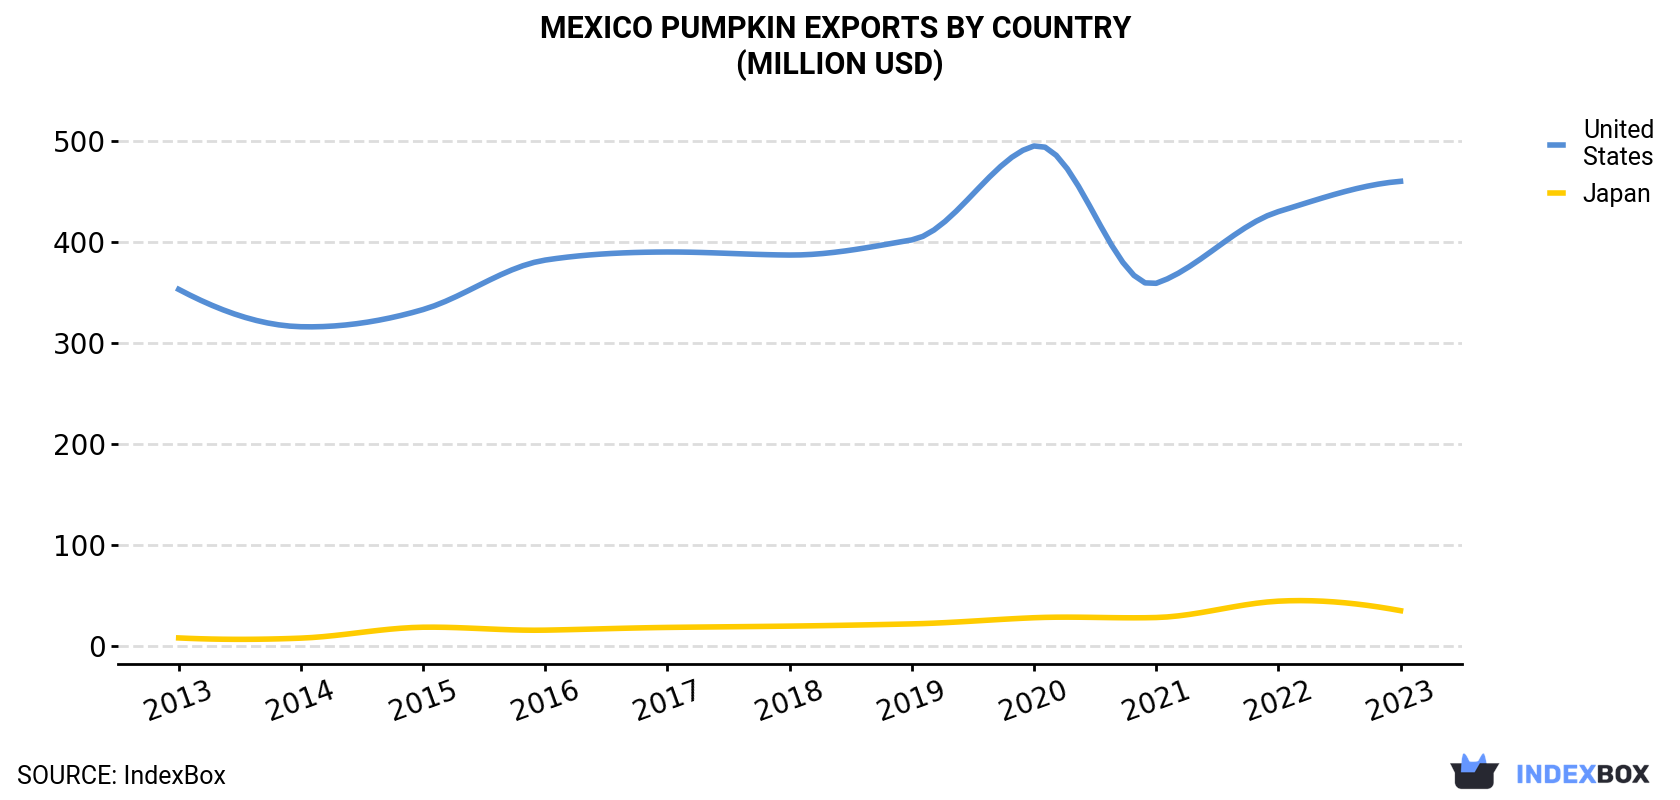 Mexico Pumpkin Exports By Country (Million USD)